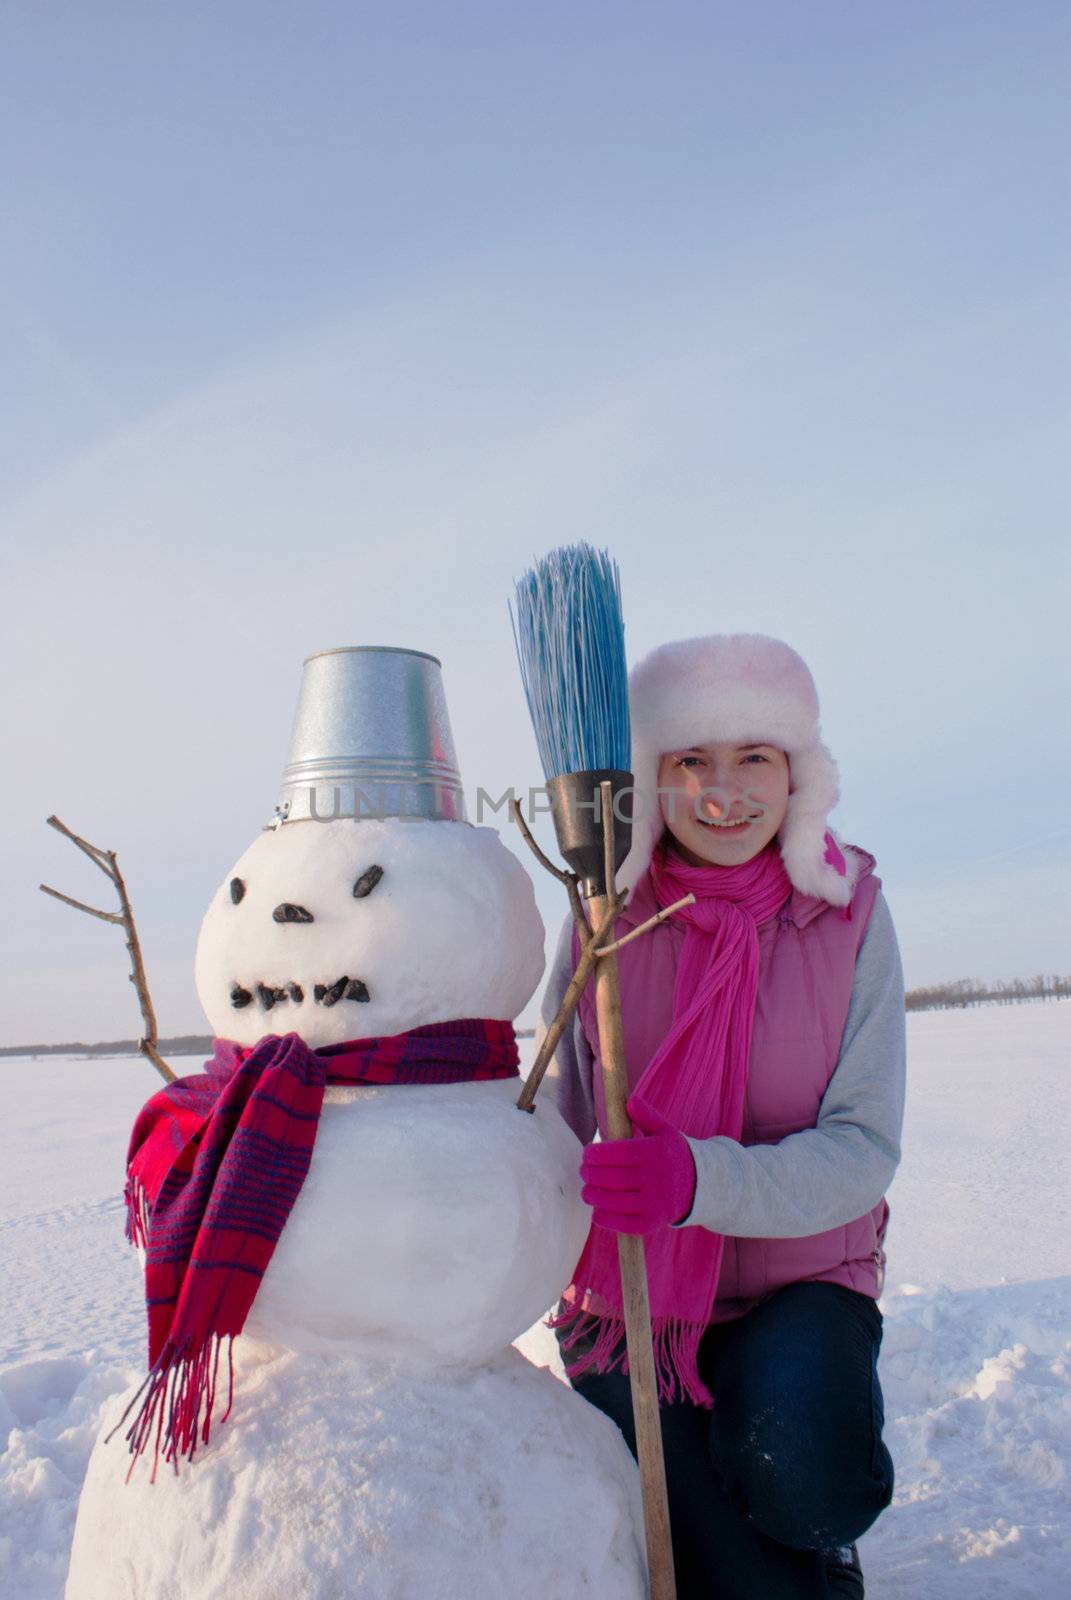 Teenage girl with snowman at winter time